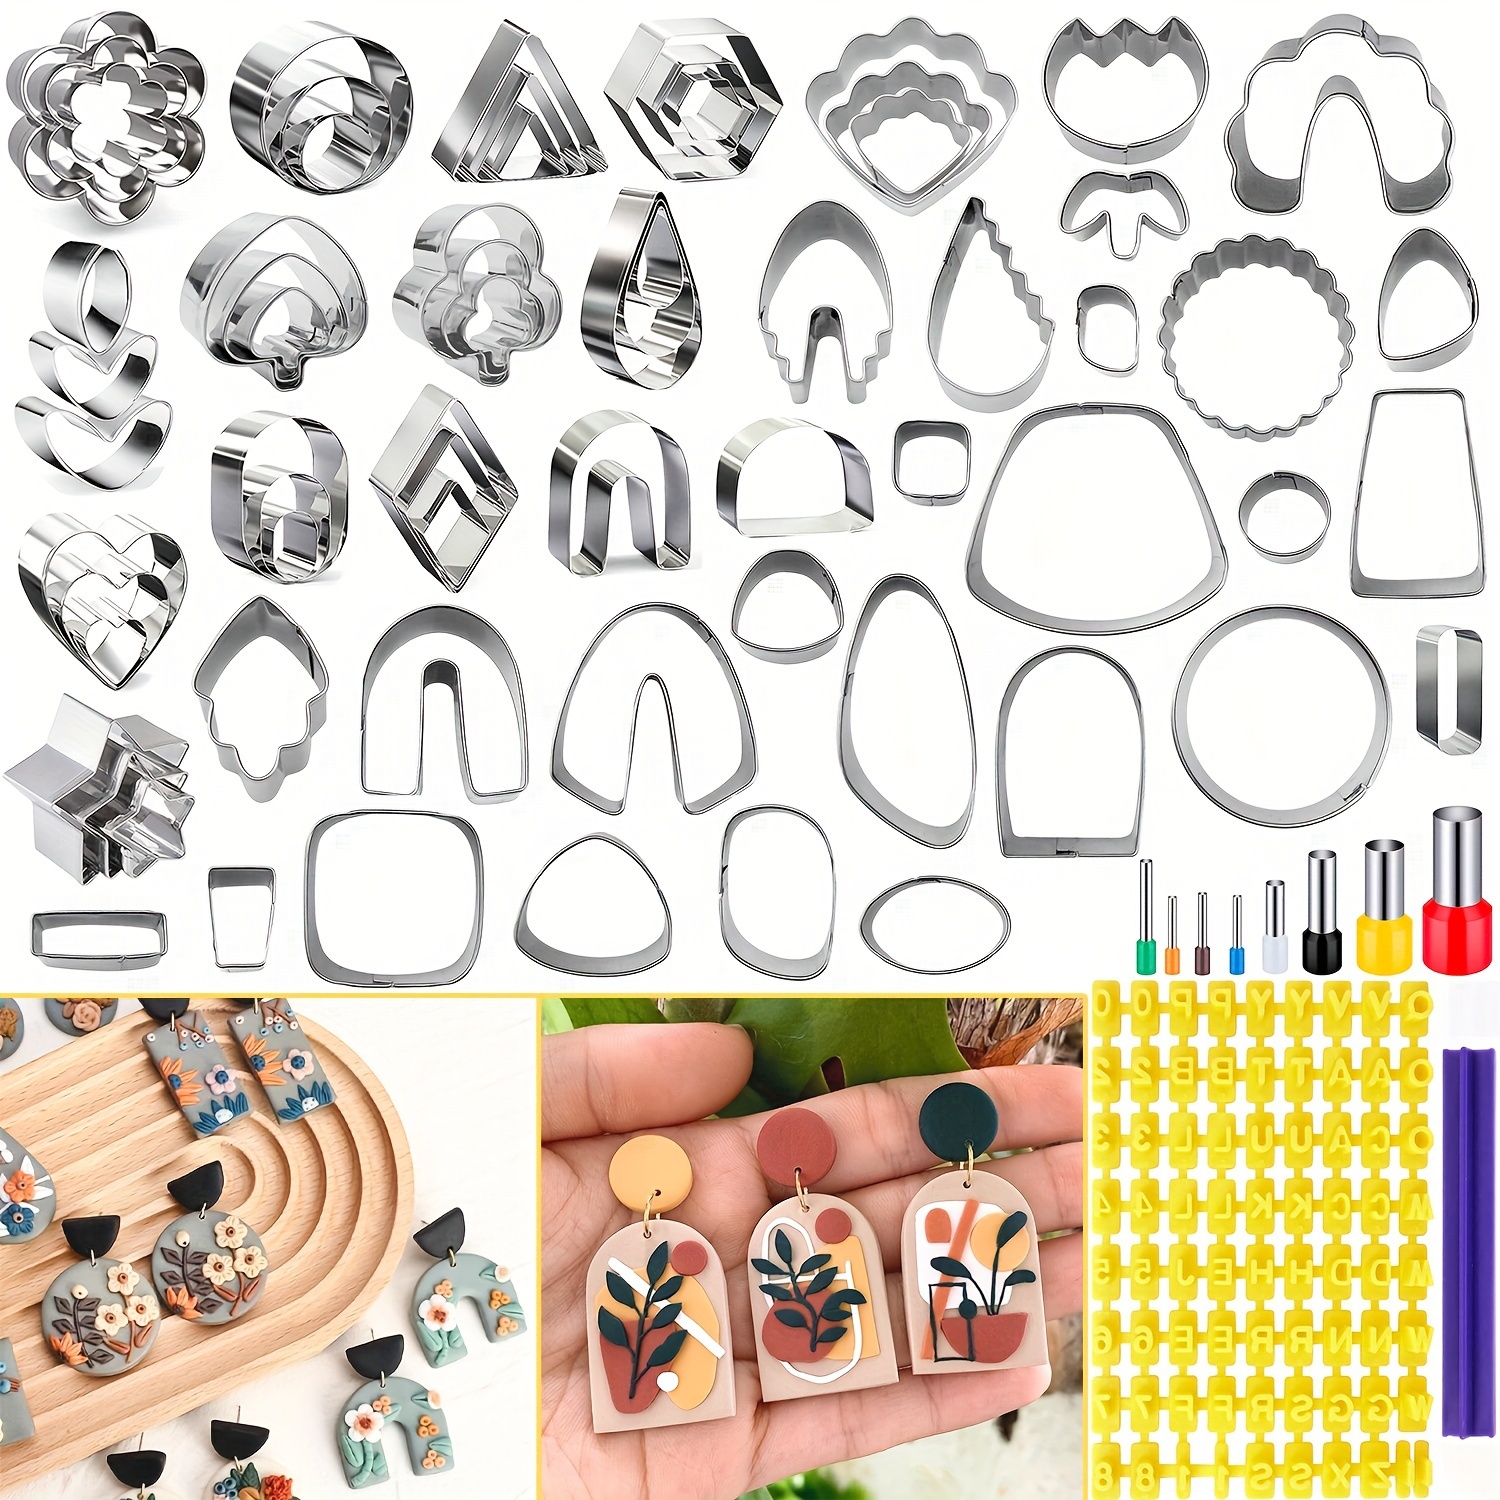 

76pcs/set Polymer Clay Cutters For Earring Making Clay Tools Set 67 Shapes Stainless Steel Clay Cutters With 8 Circle Shape Cutters 1 Clay Letter Stamp Jewelry Making Sculpting Clay